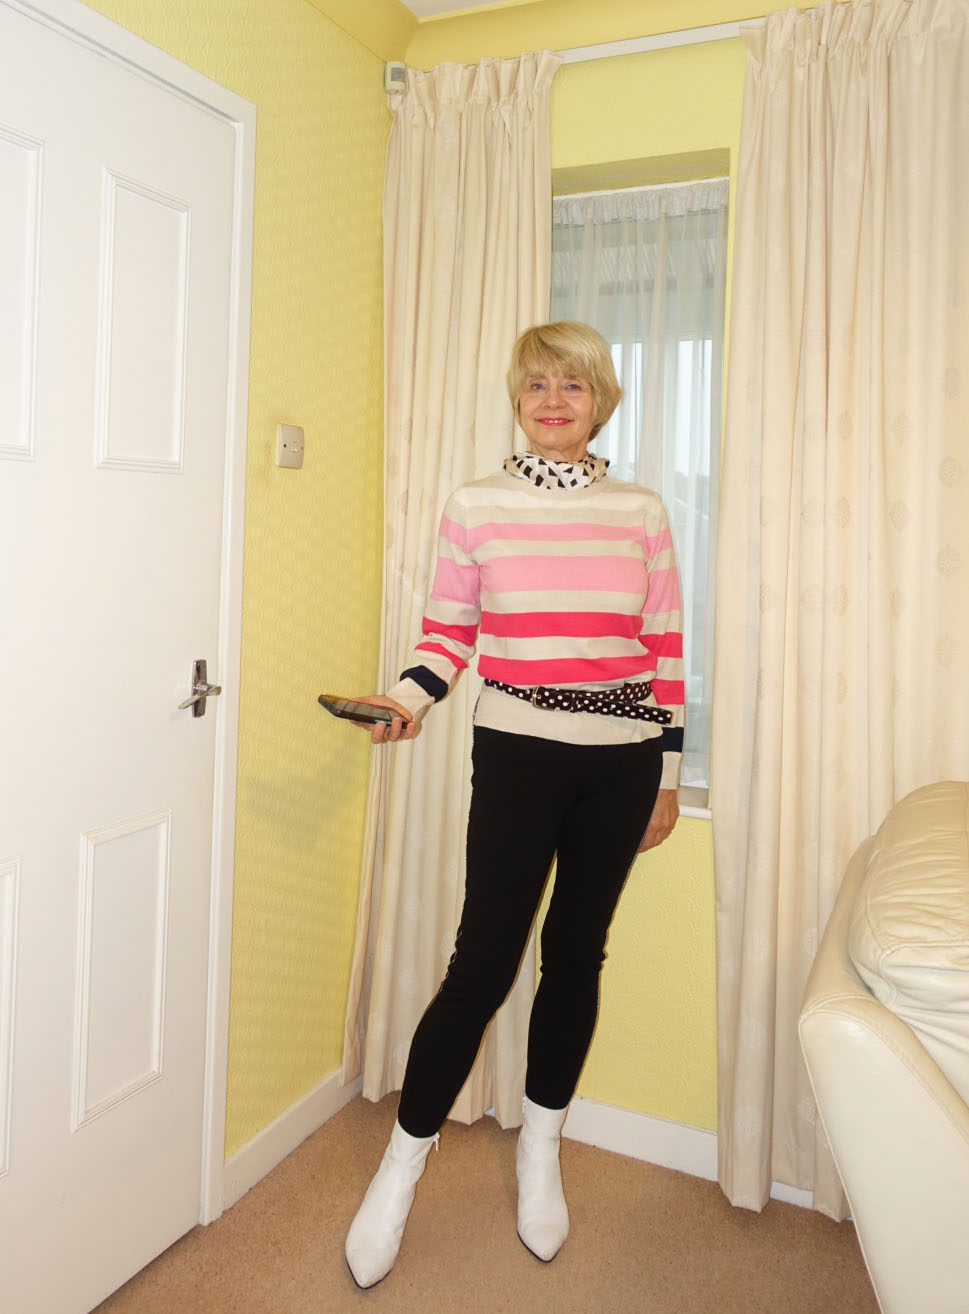 Look good oer 60 in a soft striped jumper, embellished leggings and ankle boots. Gail Hanlon from Is This Mutton in stripes and dots for the November Style Not Age Challenge